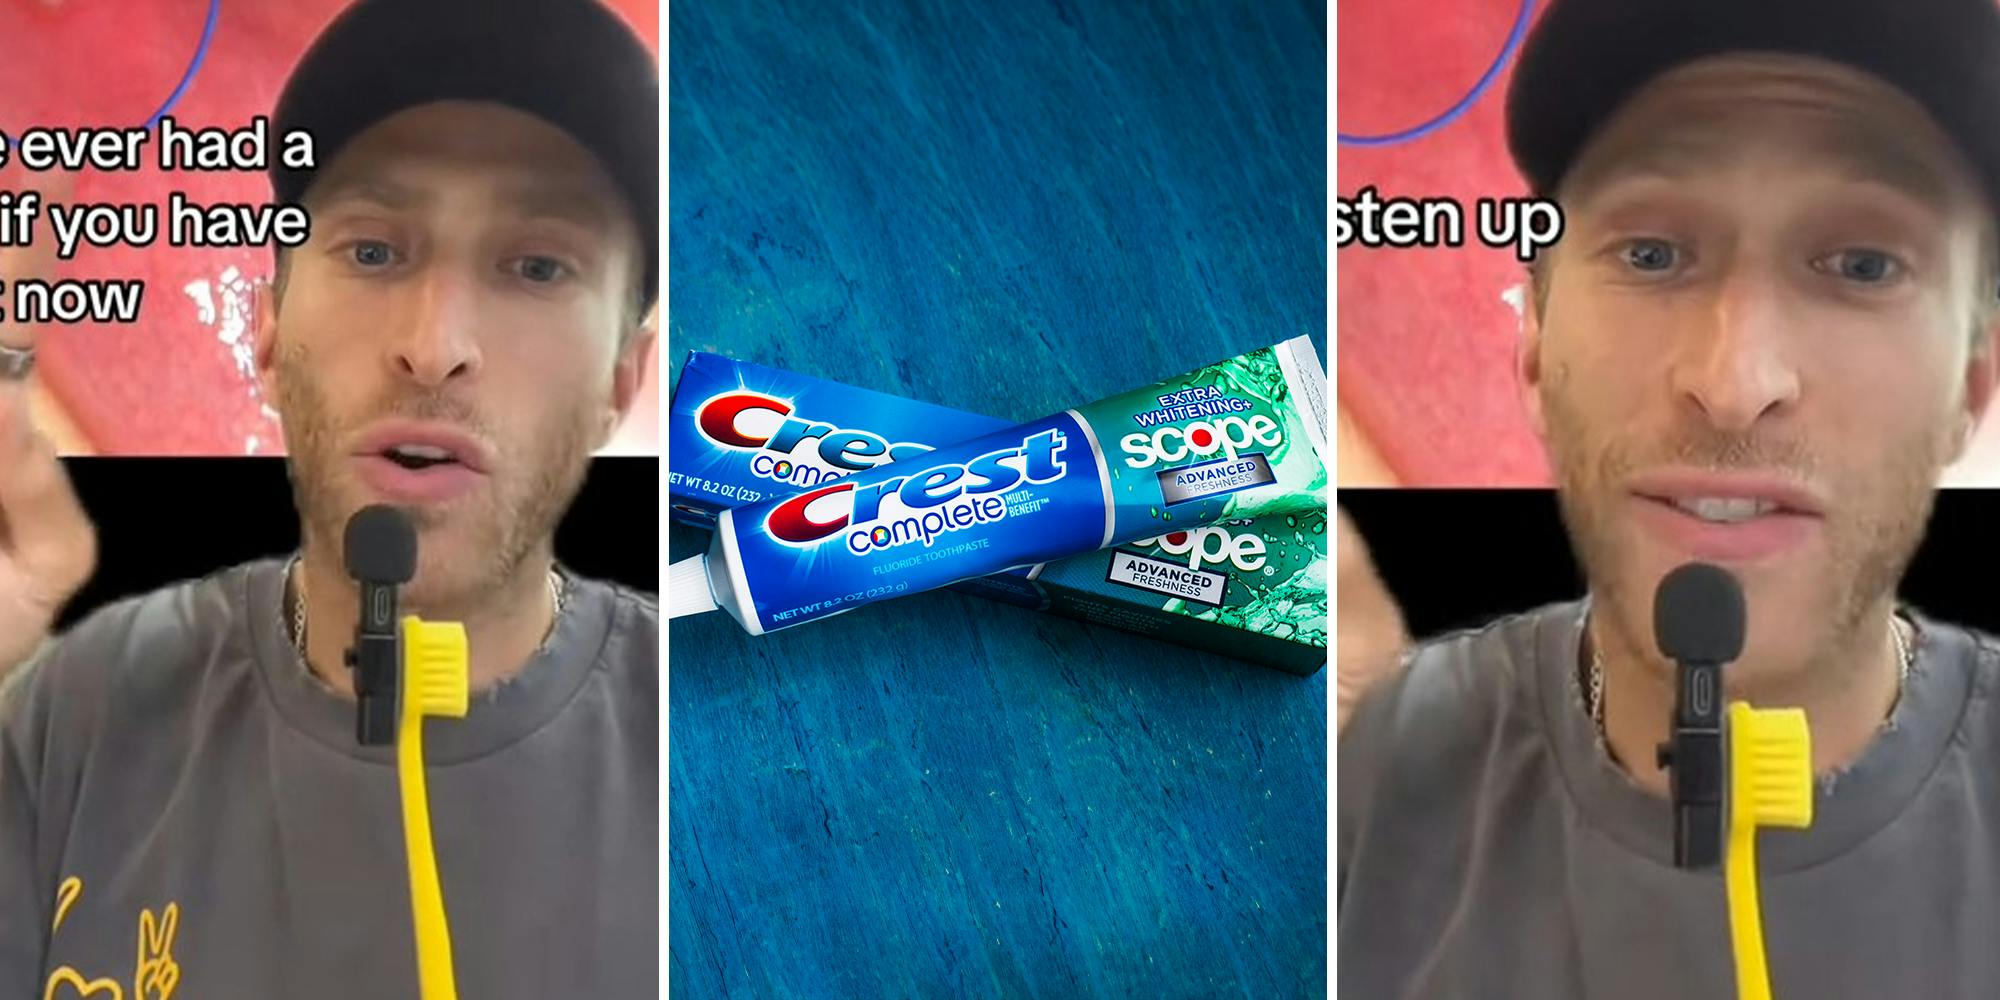 ‘I had canker sores regularly my whole life’: Expert says Crest toothpaste causes canker sores